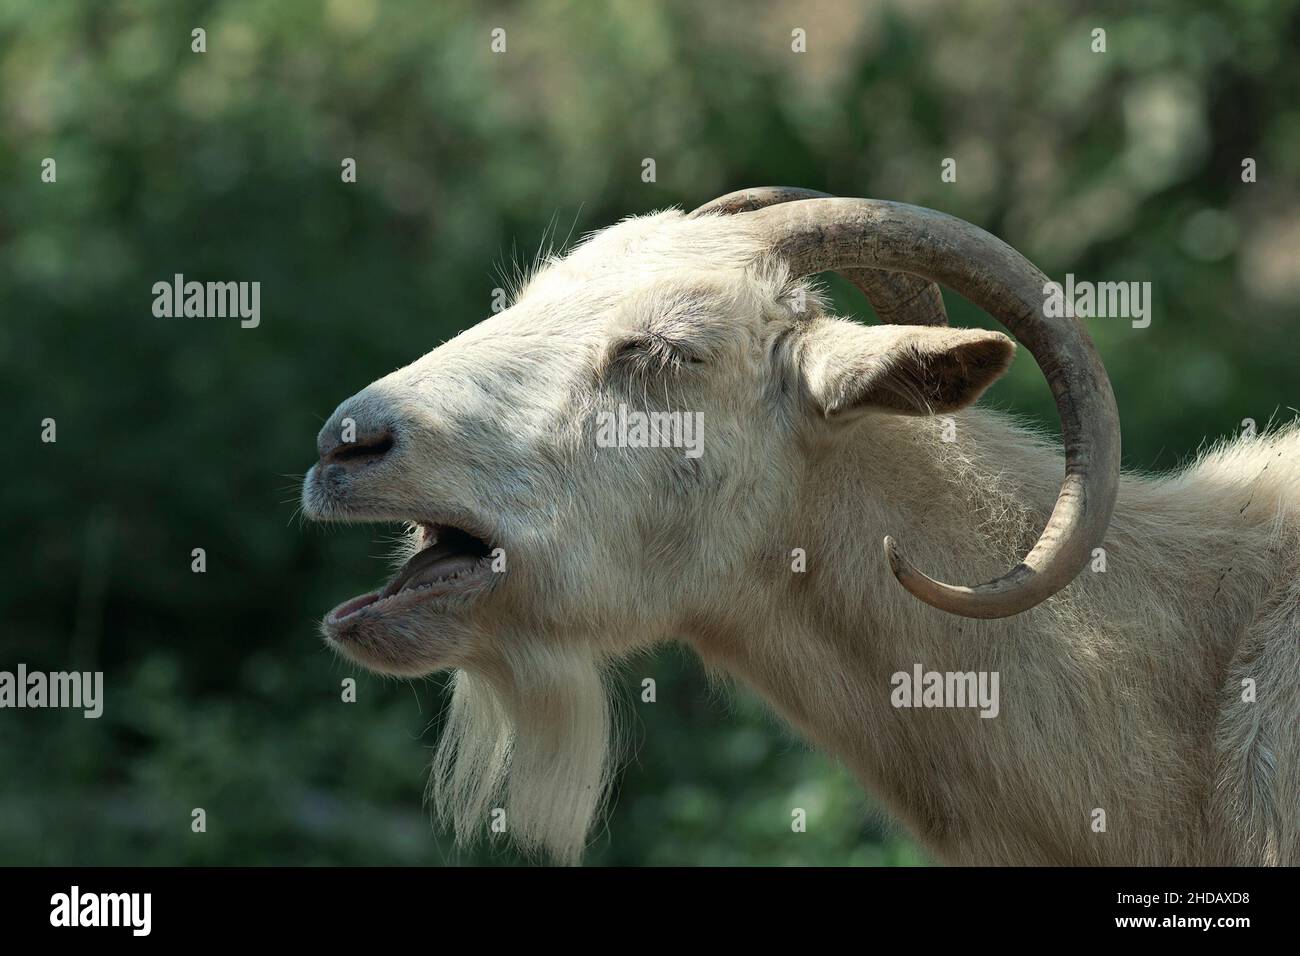 portrait of an angry goat over green out of focus background Stock Photo